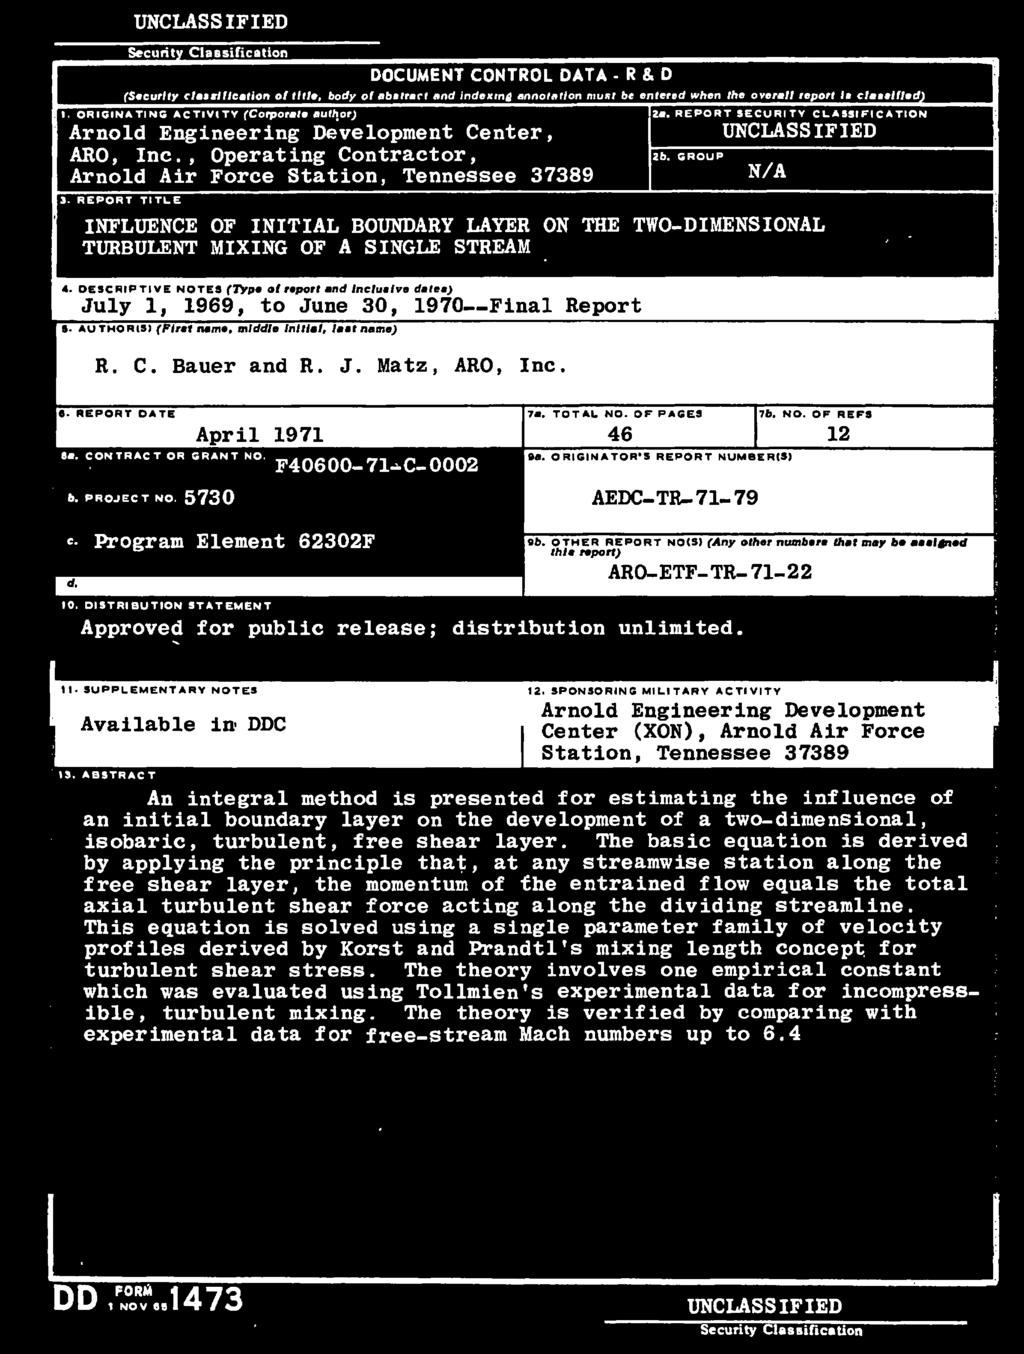 REPORT DATE April 1971 8a. CONTRACT OR GRANT NO. F40600-71^0-0002 6. PROJECT NO. 5730 c- Prgram Element 62302F 7a. TOTAL NO. Or PAGES 46»a. ORIGINATOR'S REPORT NUMBER(S) AEDC-TR-71-79 76. NO. OF REPS 9b.